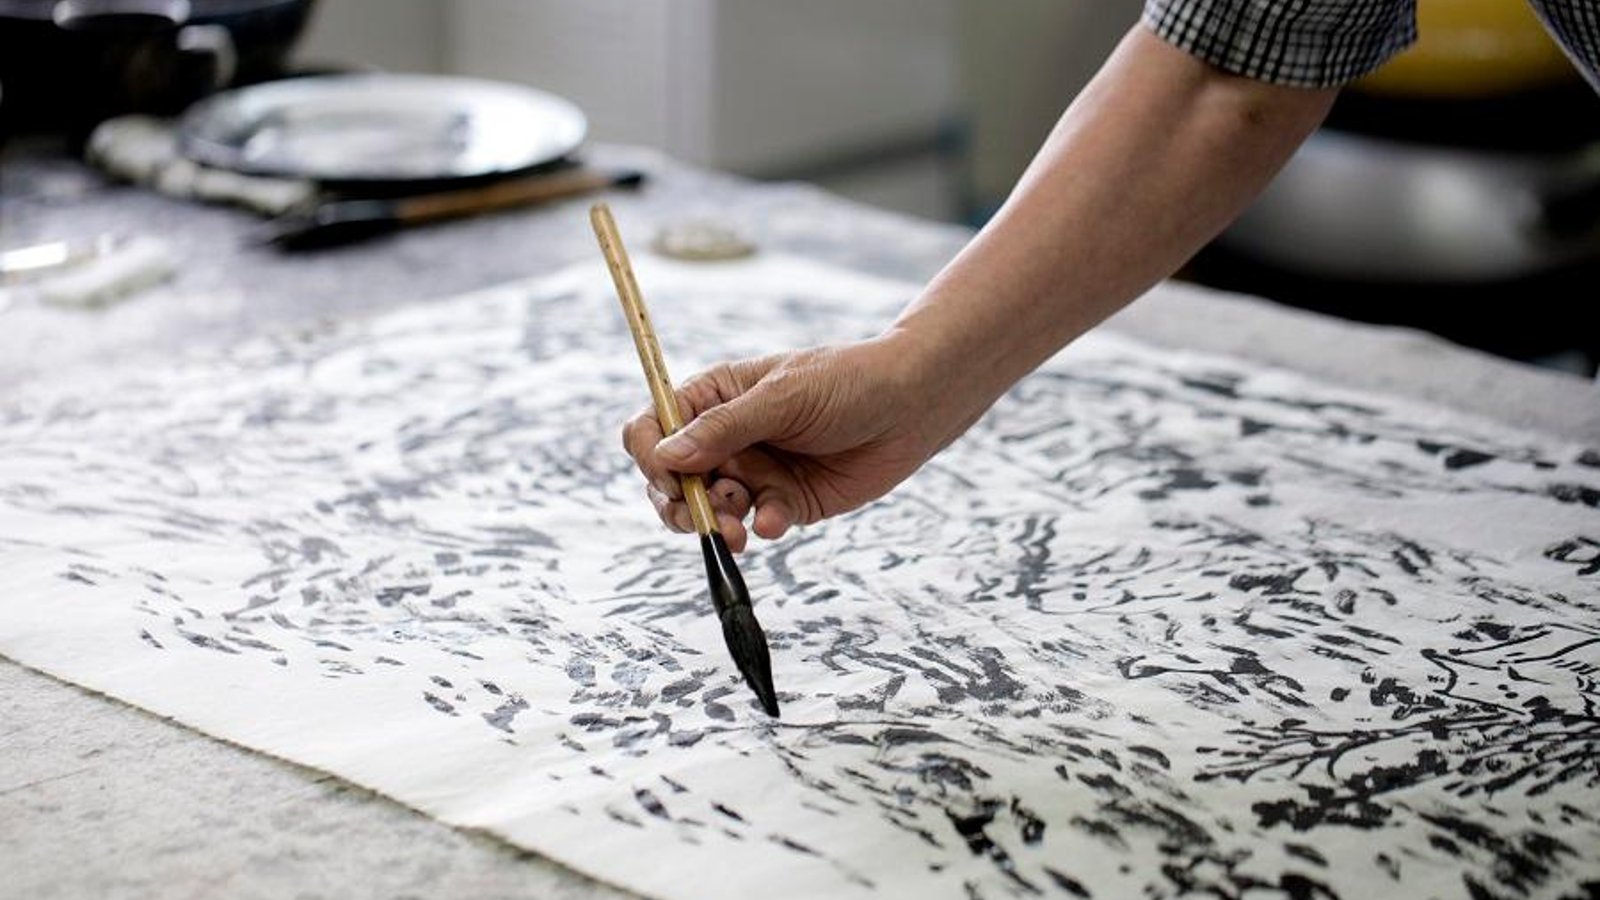 The Enduring Passion for Ink - A Project on Contemporary Ink Painters